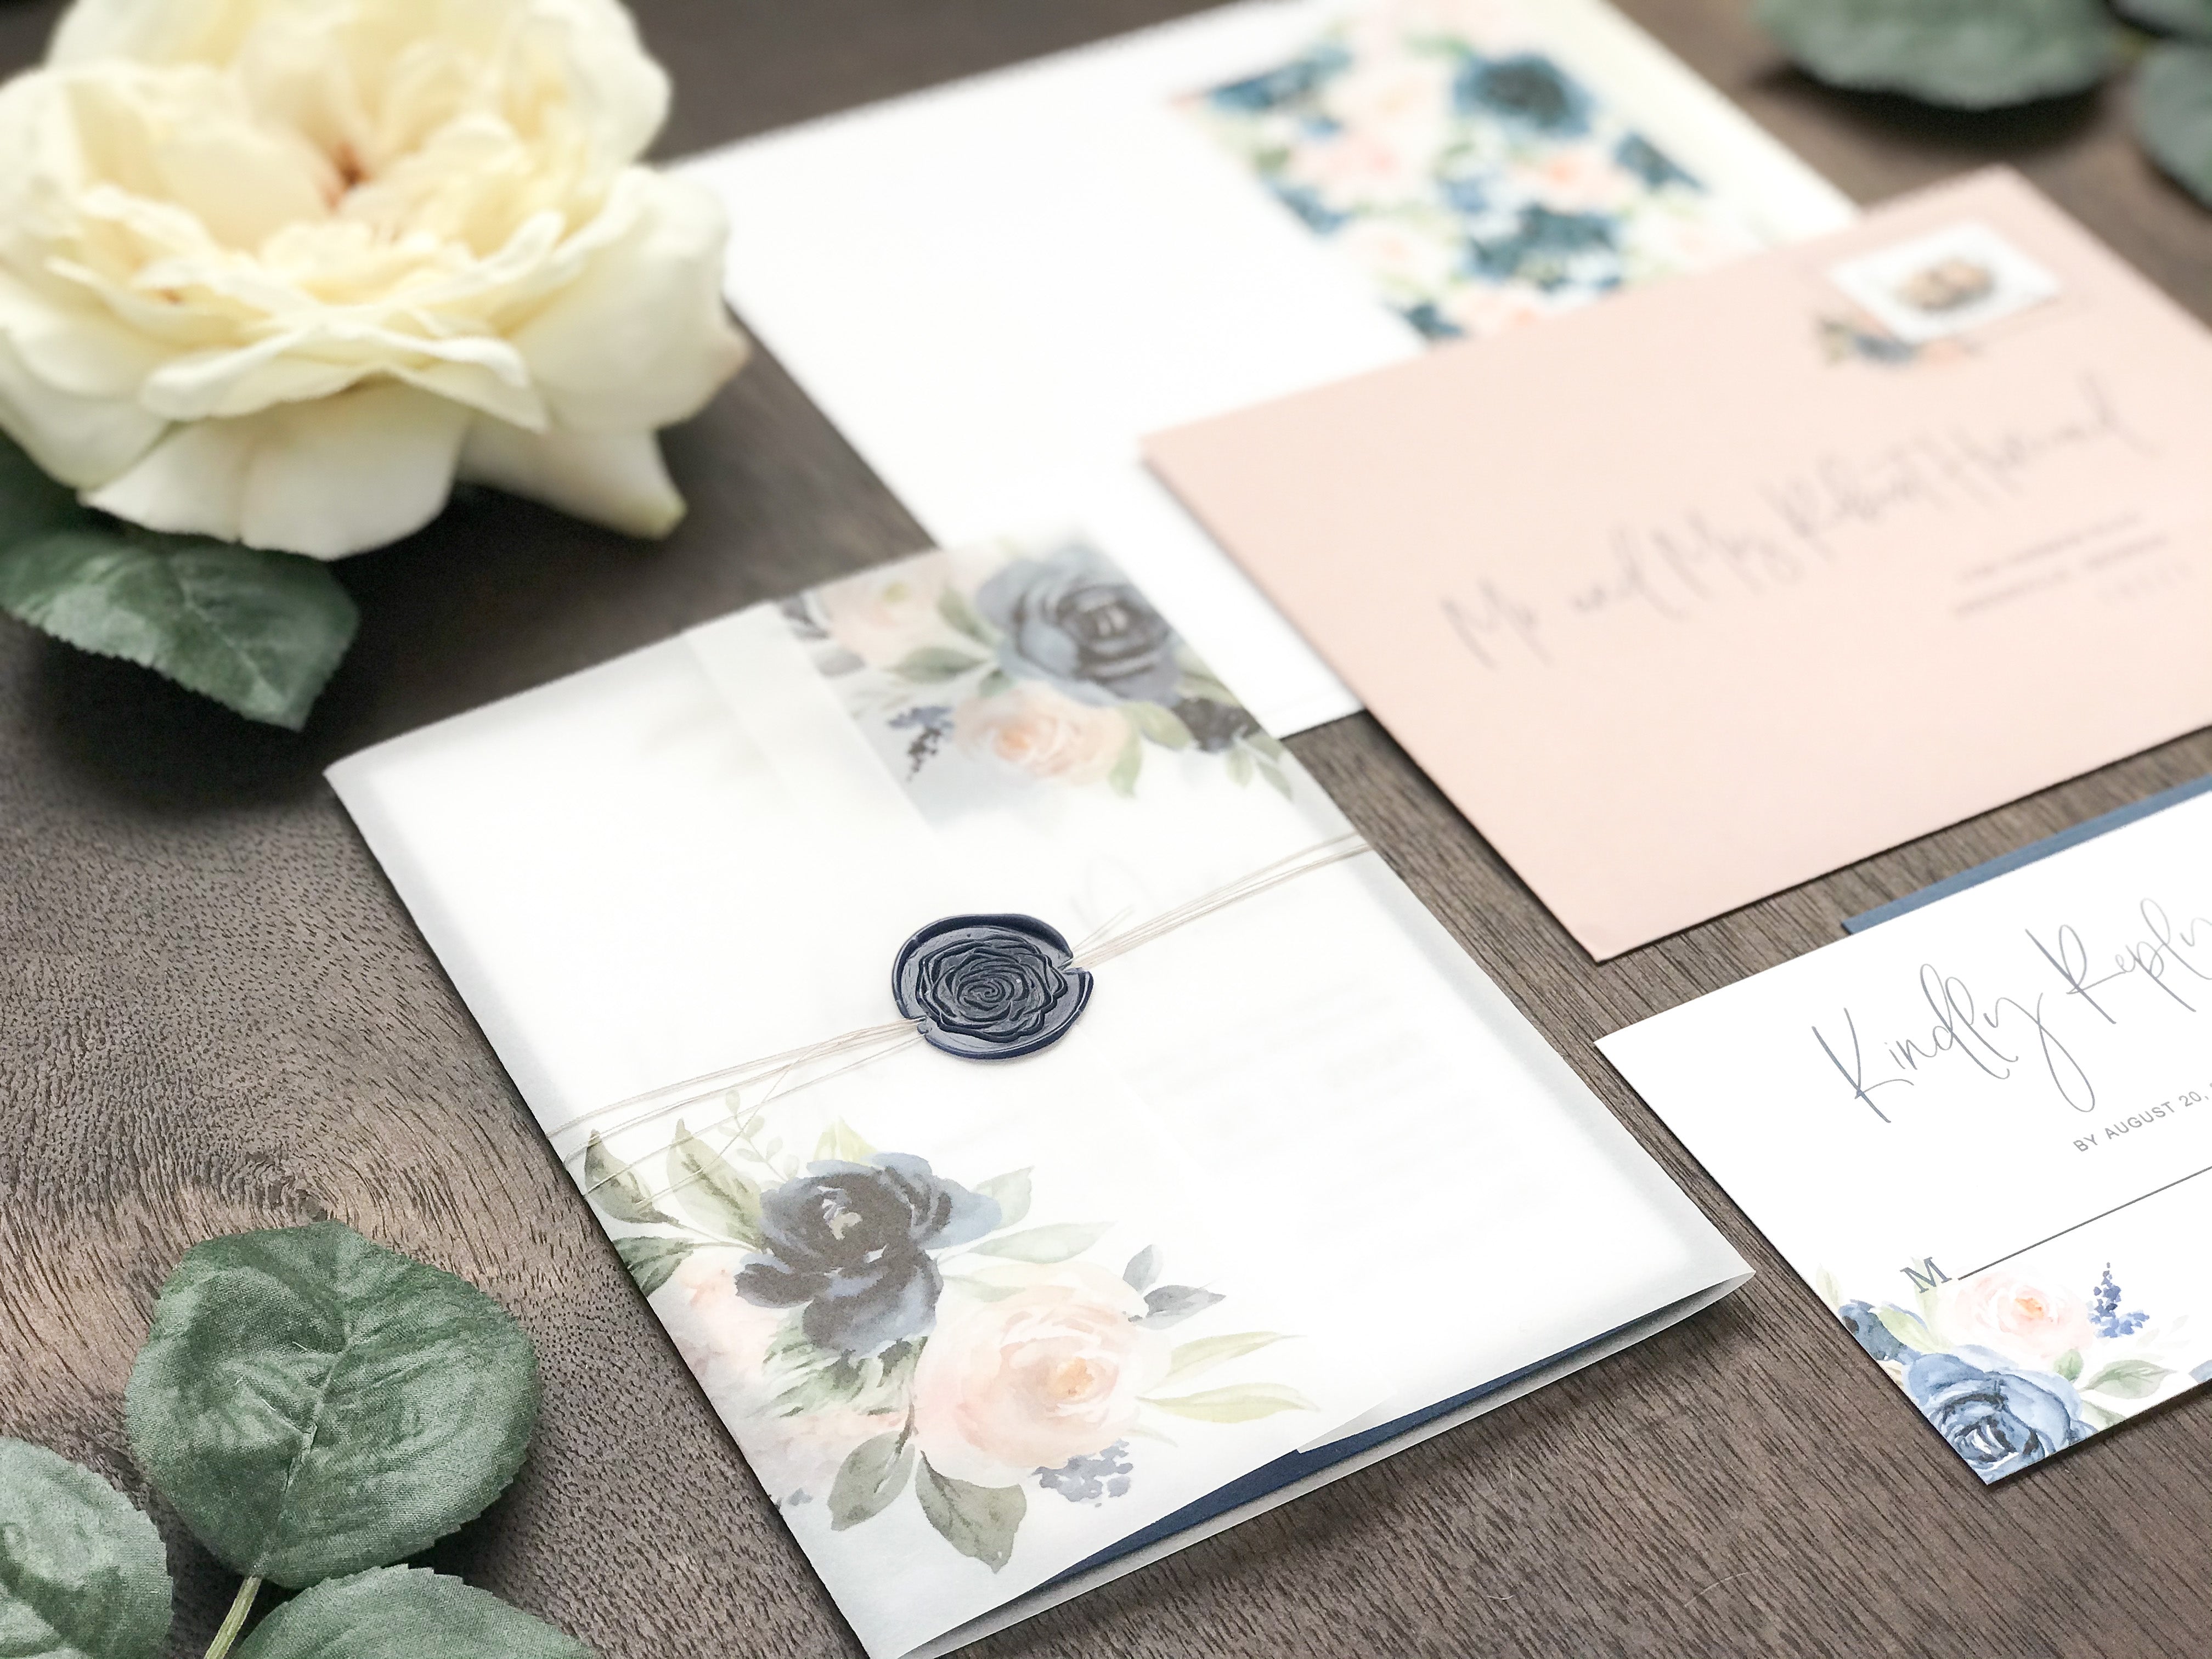 Blush Pink and Navy Blue Wedding Invitation with Vellum and Wax Seal